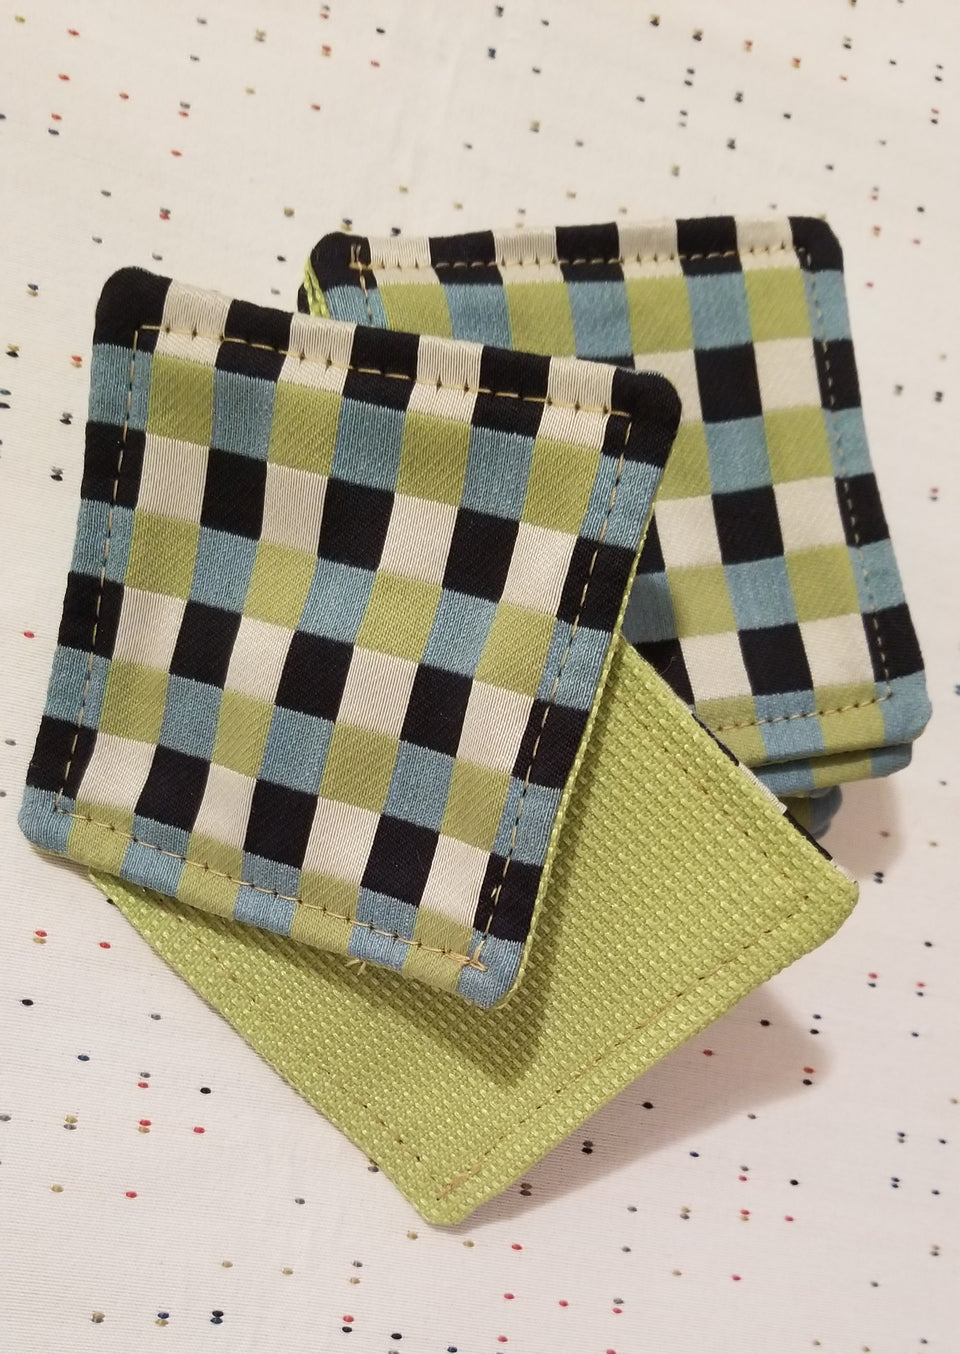 Chuck black, white, lime green, and turquoise gingham check patterned coasters front back detail.